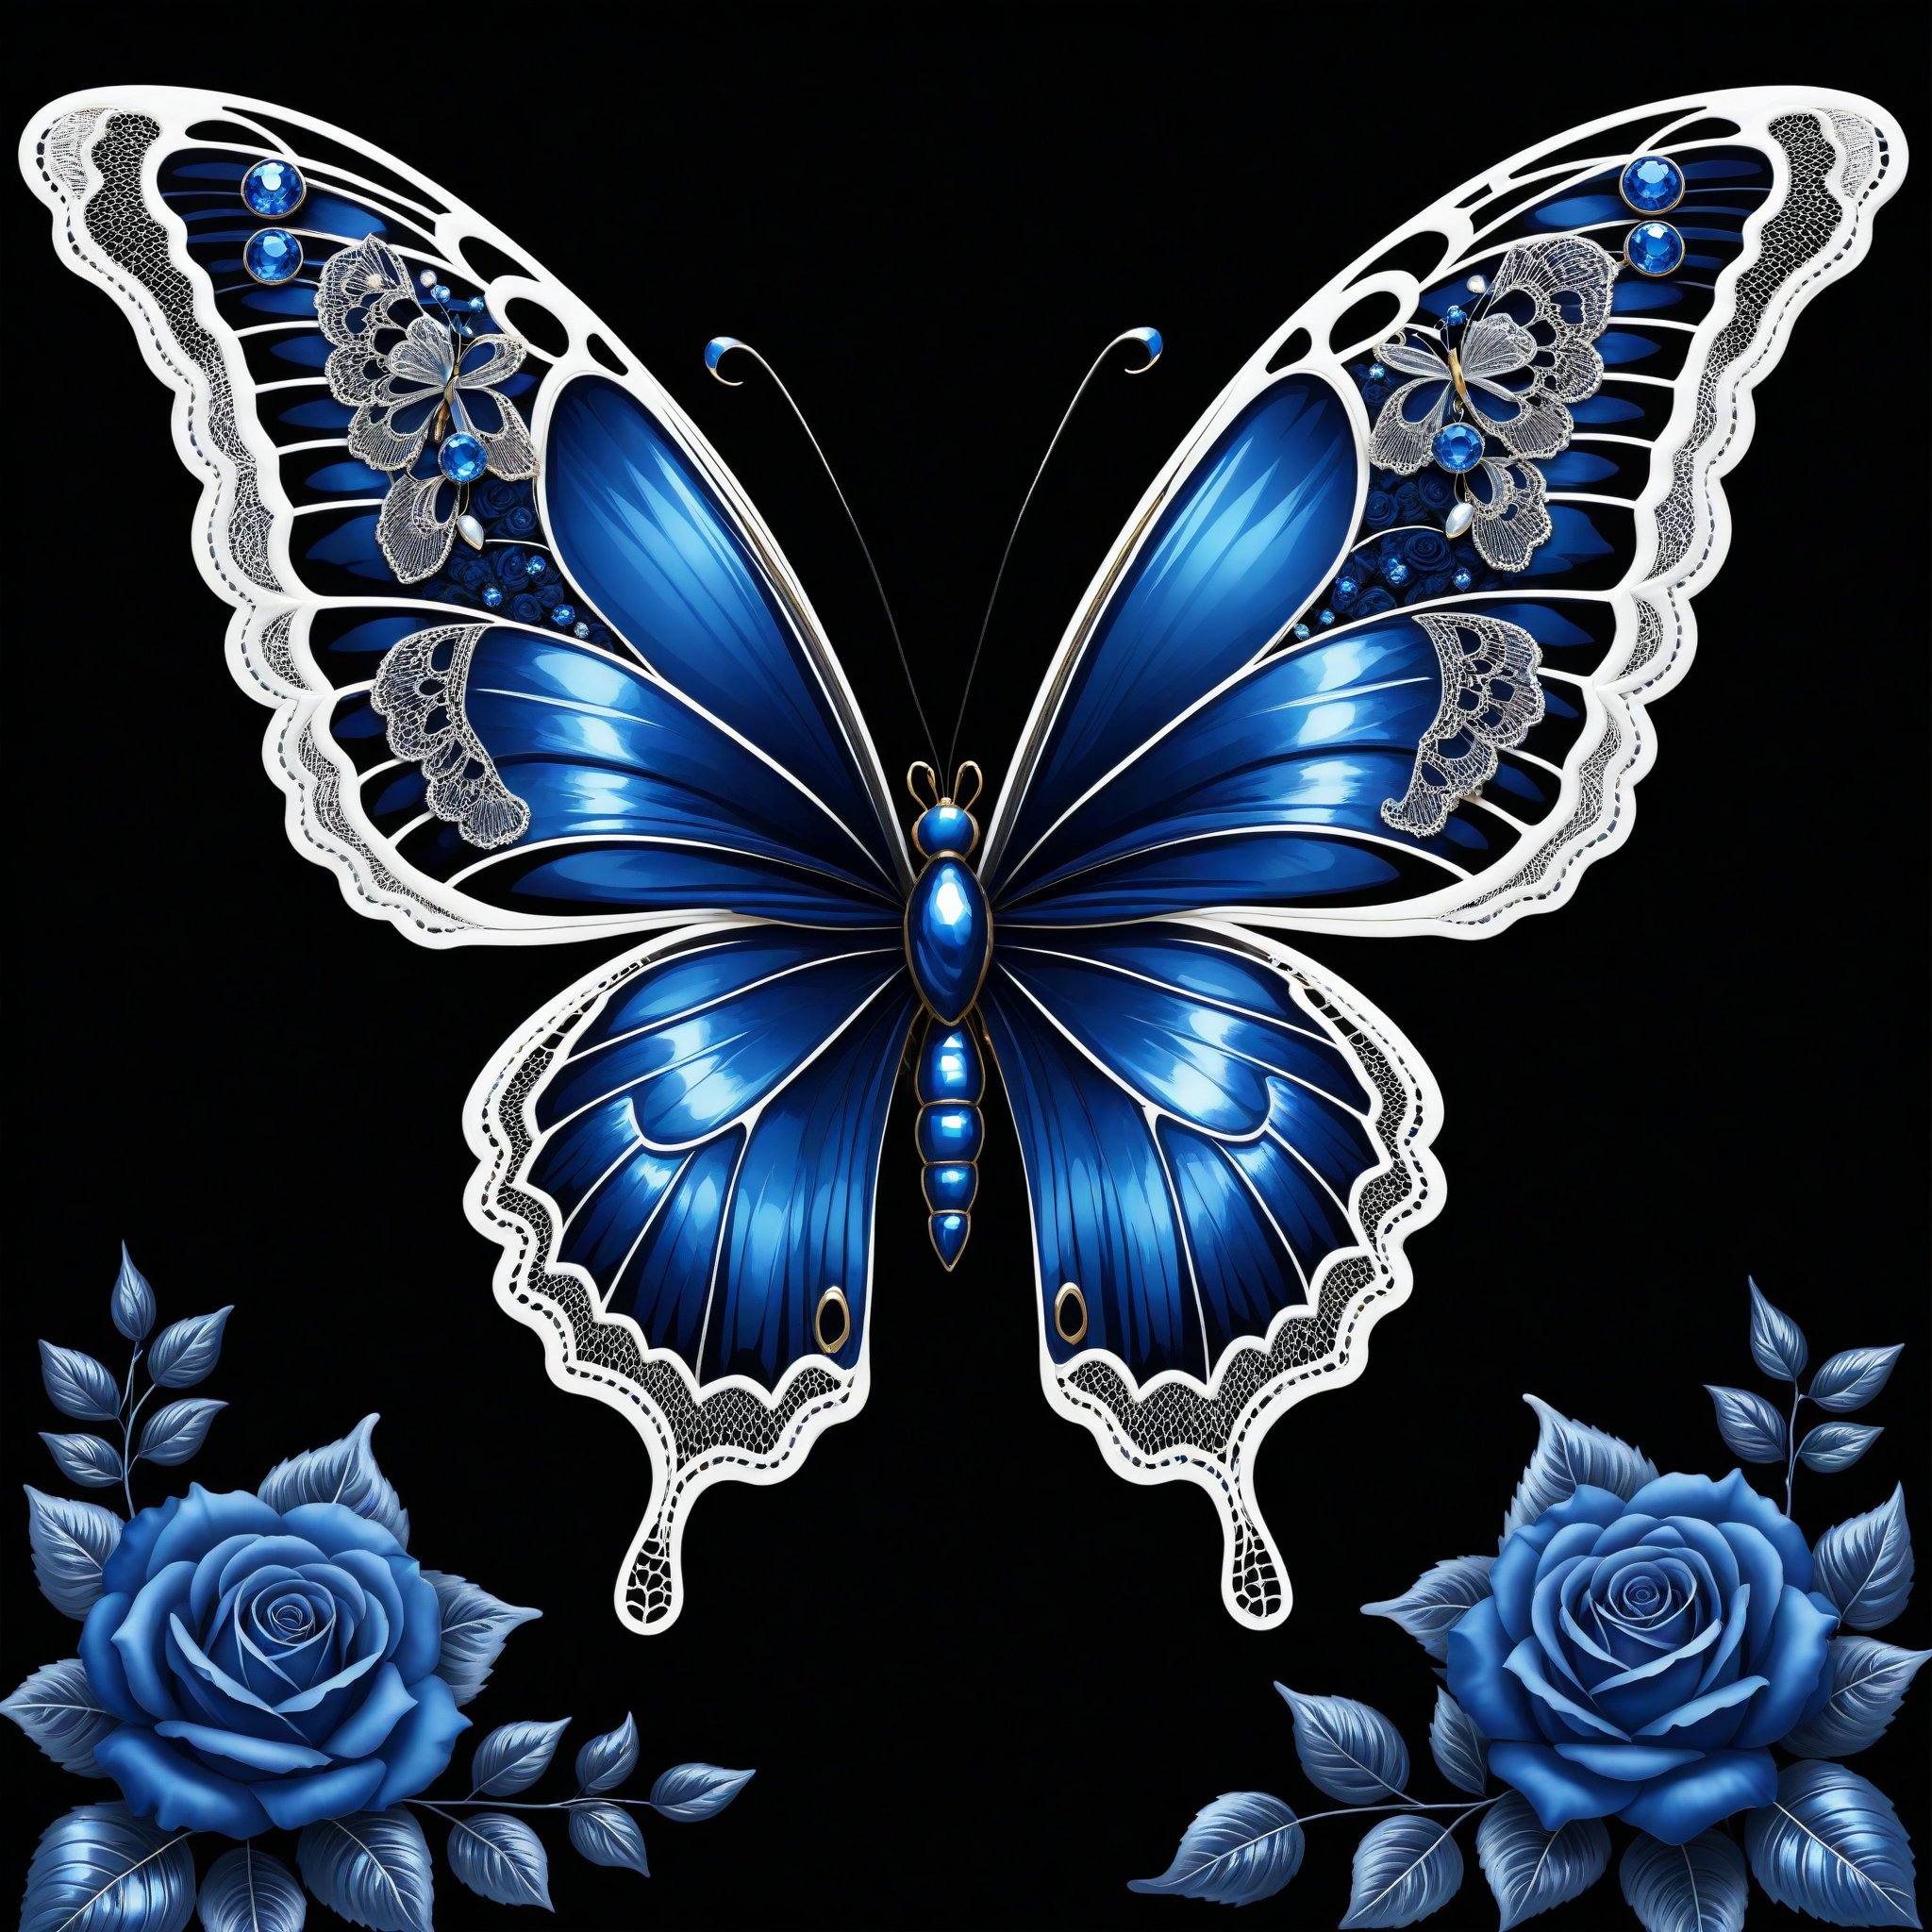 a butterfly iridicent dark blue whit lace bows roses elegant, with jewerlly epic decoration, clasic ornament Mechanical lines Elegance T-shirt design, BLACK BACKGROUND